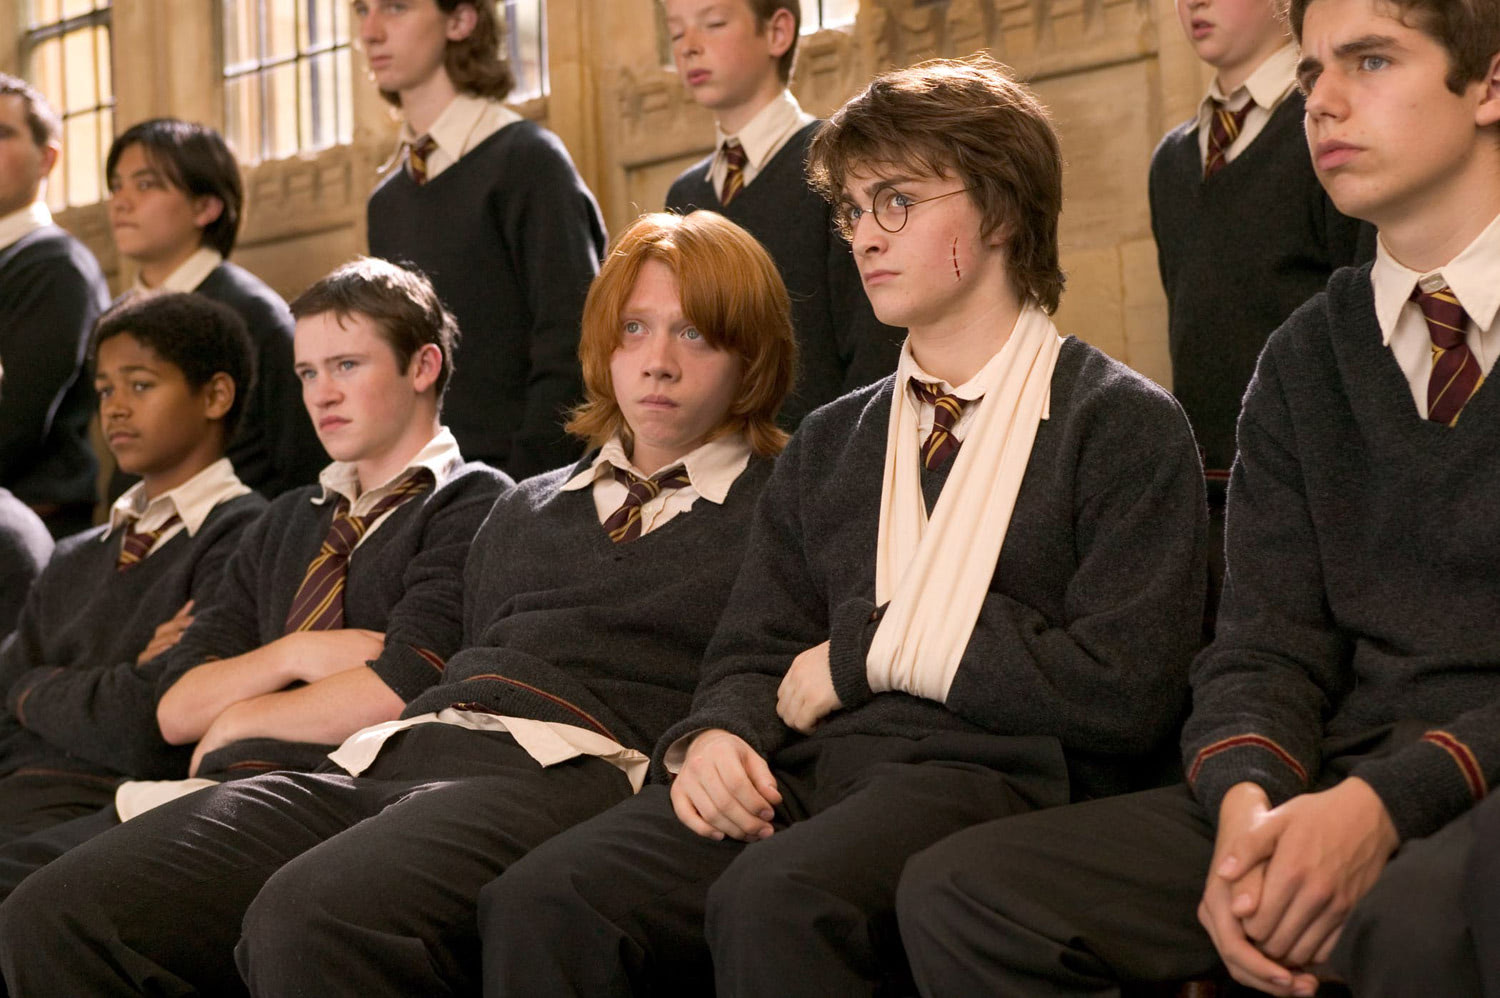 Harry and Ron at dancing lessons